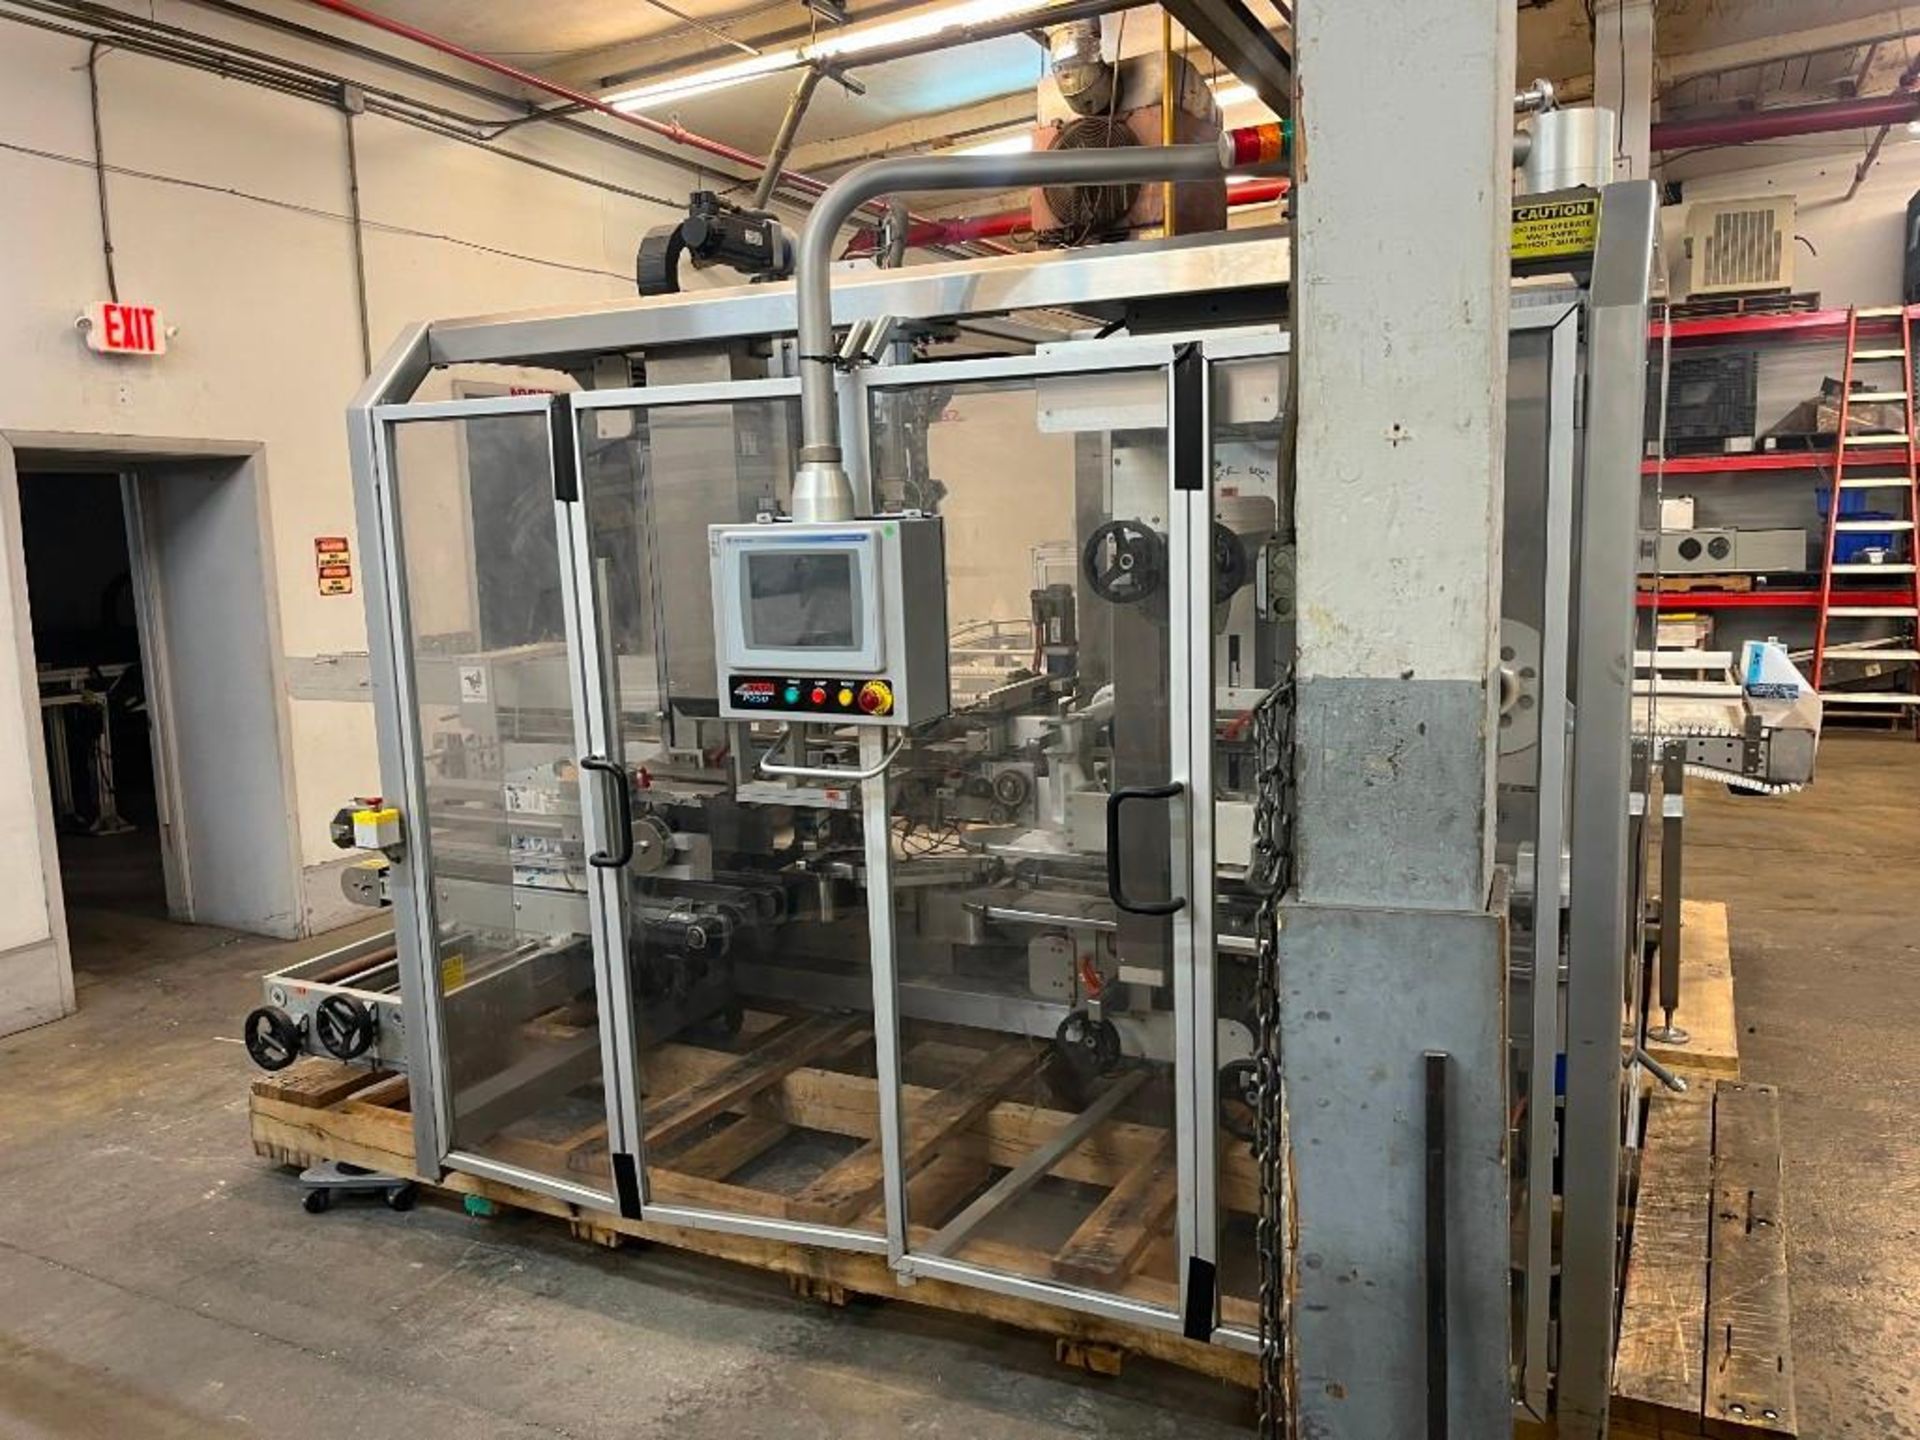 Serpa Packaging Solutions Case Packer, Model P250-L.H Load, S/N: 1875. Rated for speeds up to 15 cas